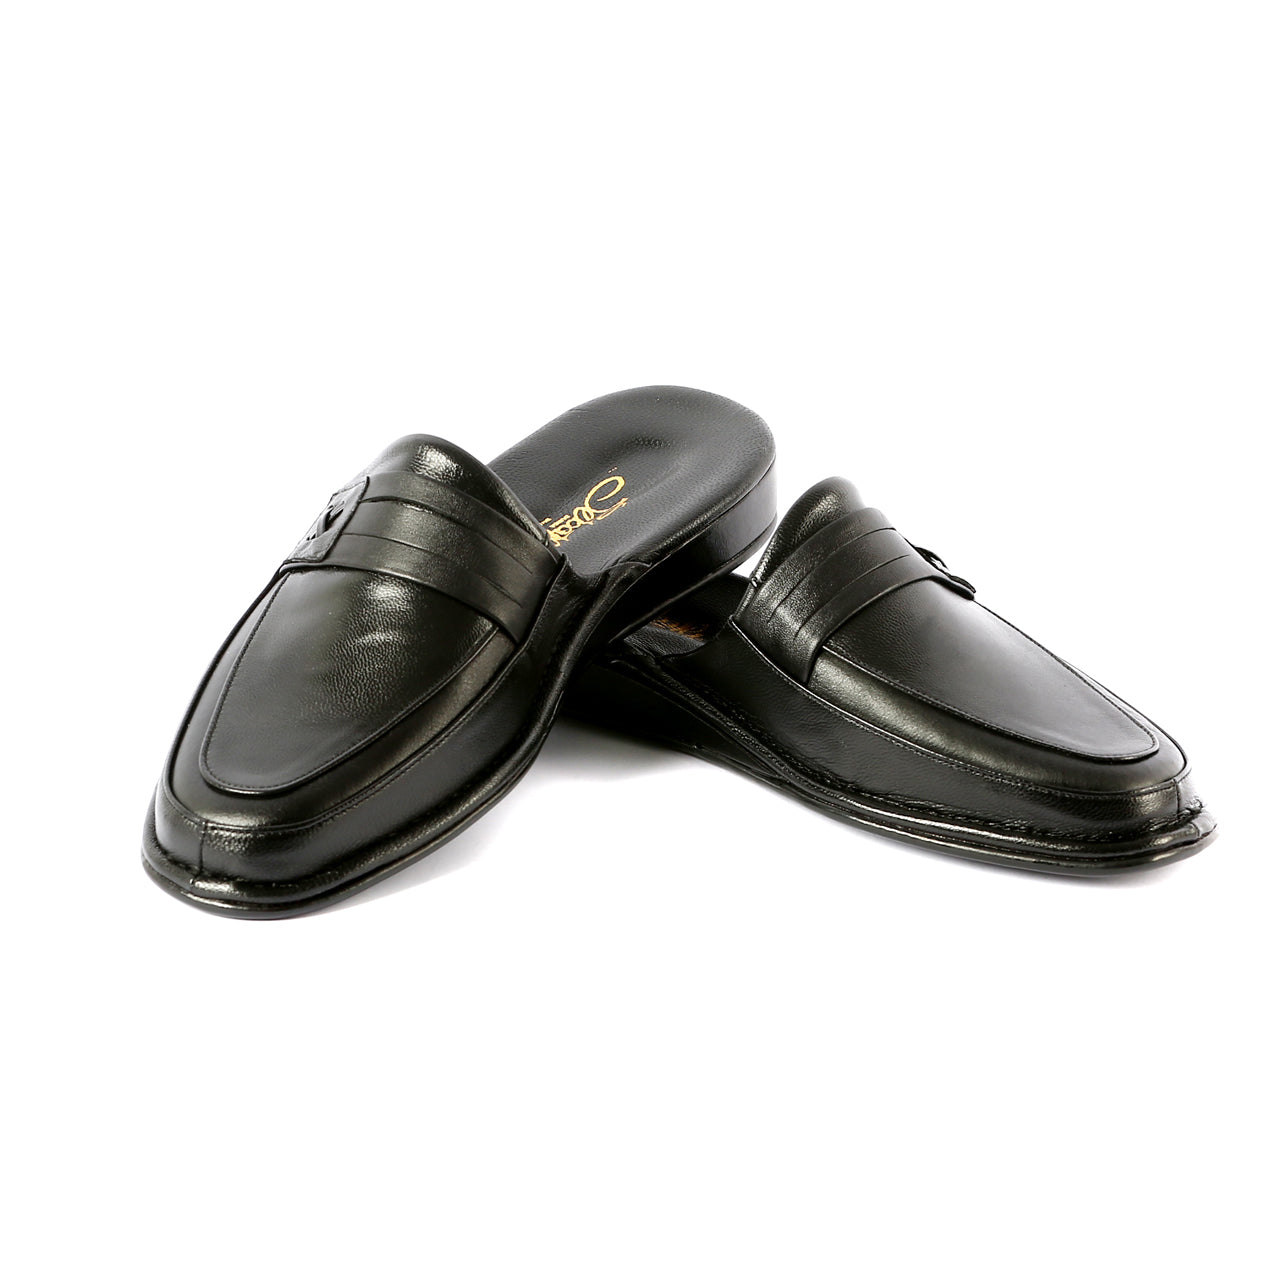 Marlon leather slippers with leather sole leather appliqué – Princetown Slippers